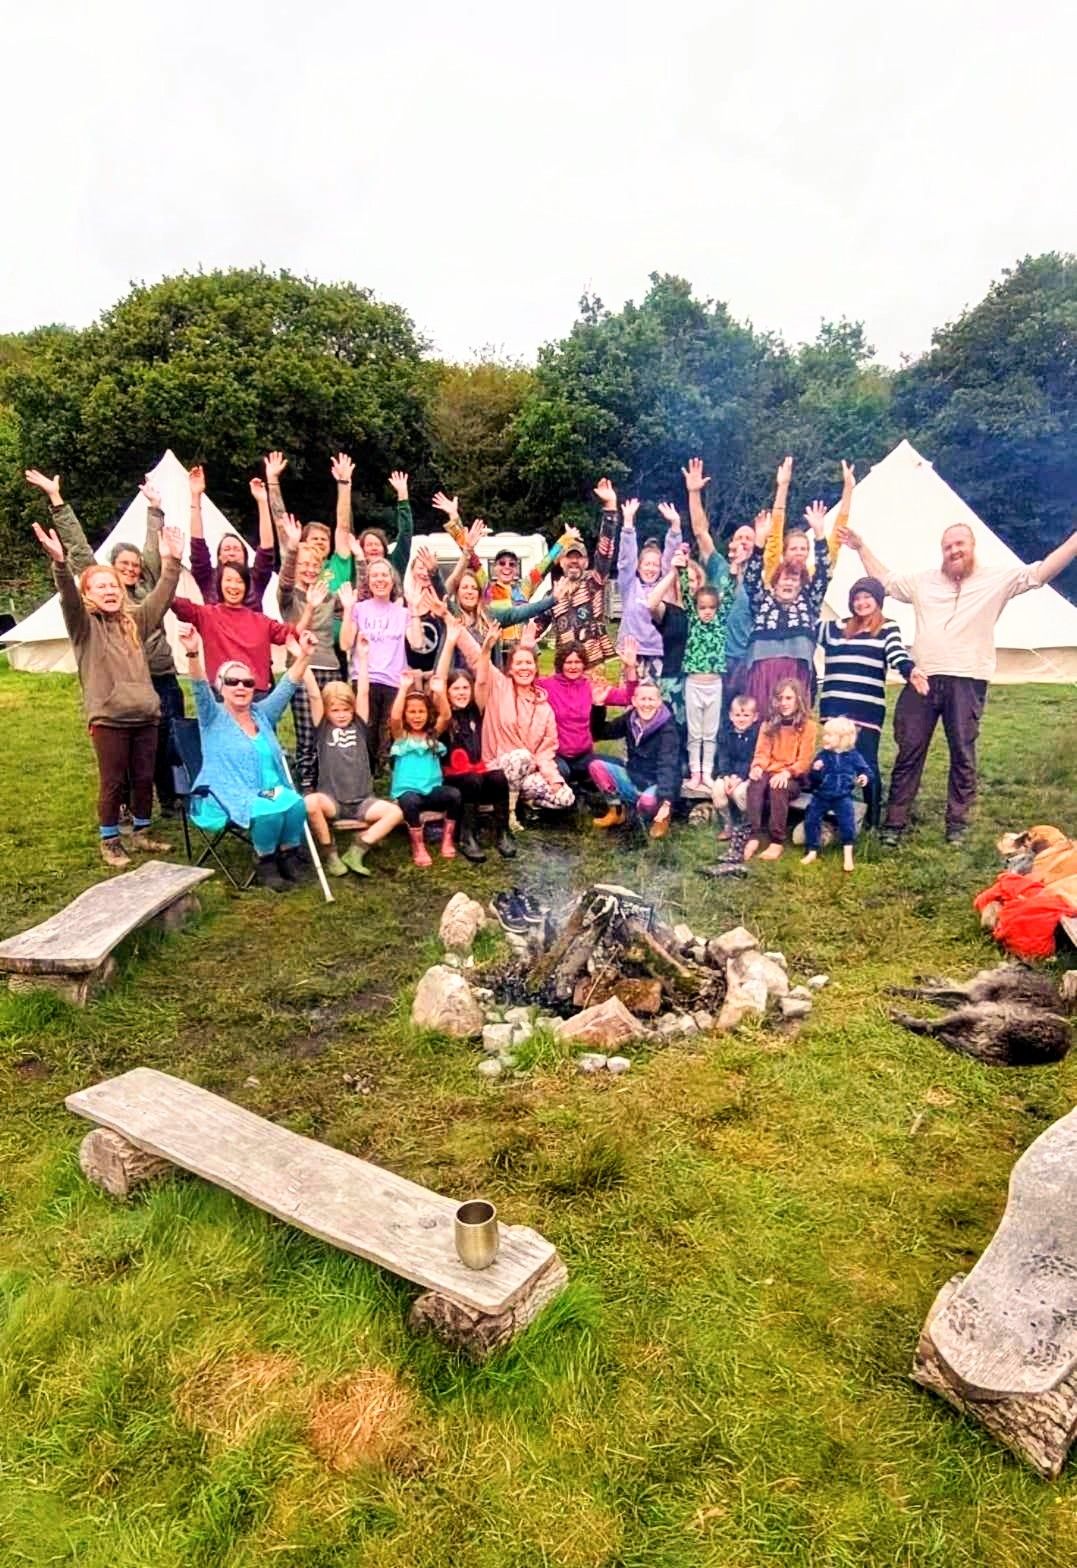 August Community Camping and Healing Gathering